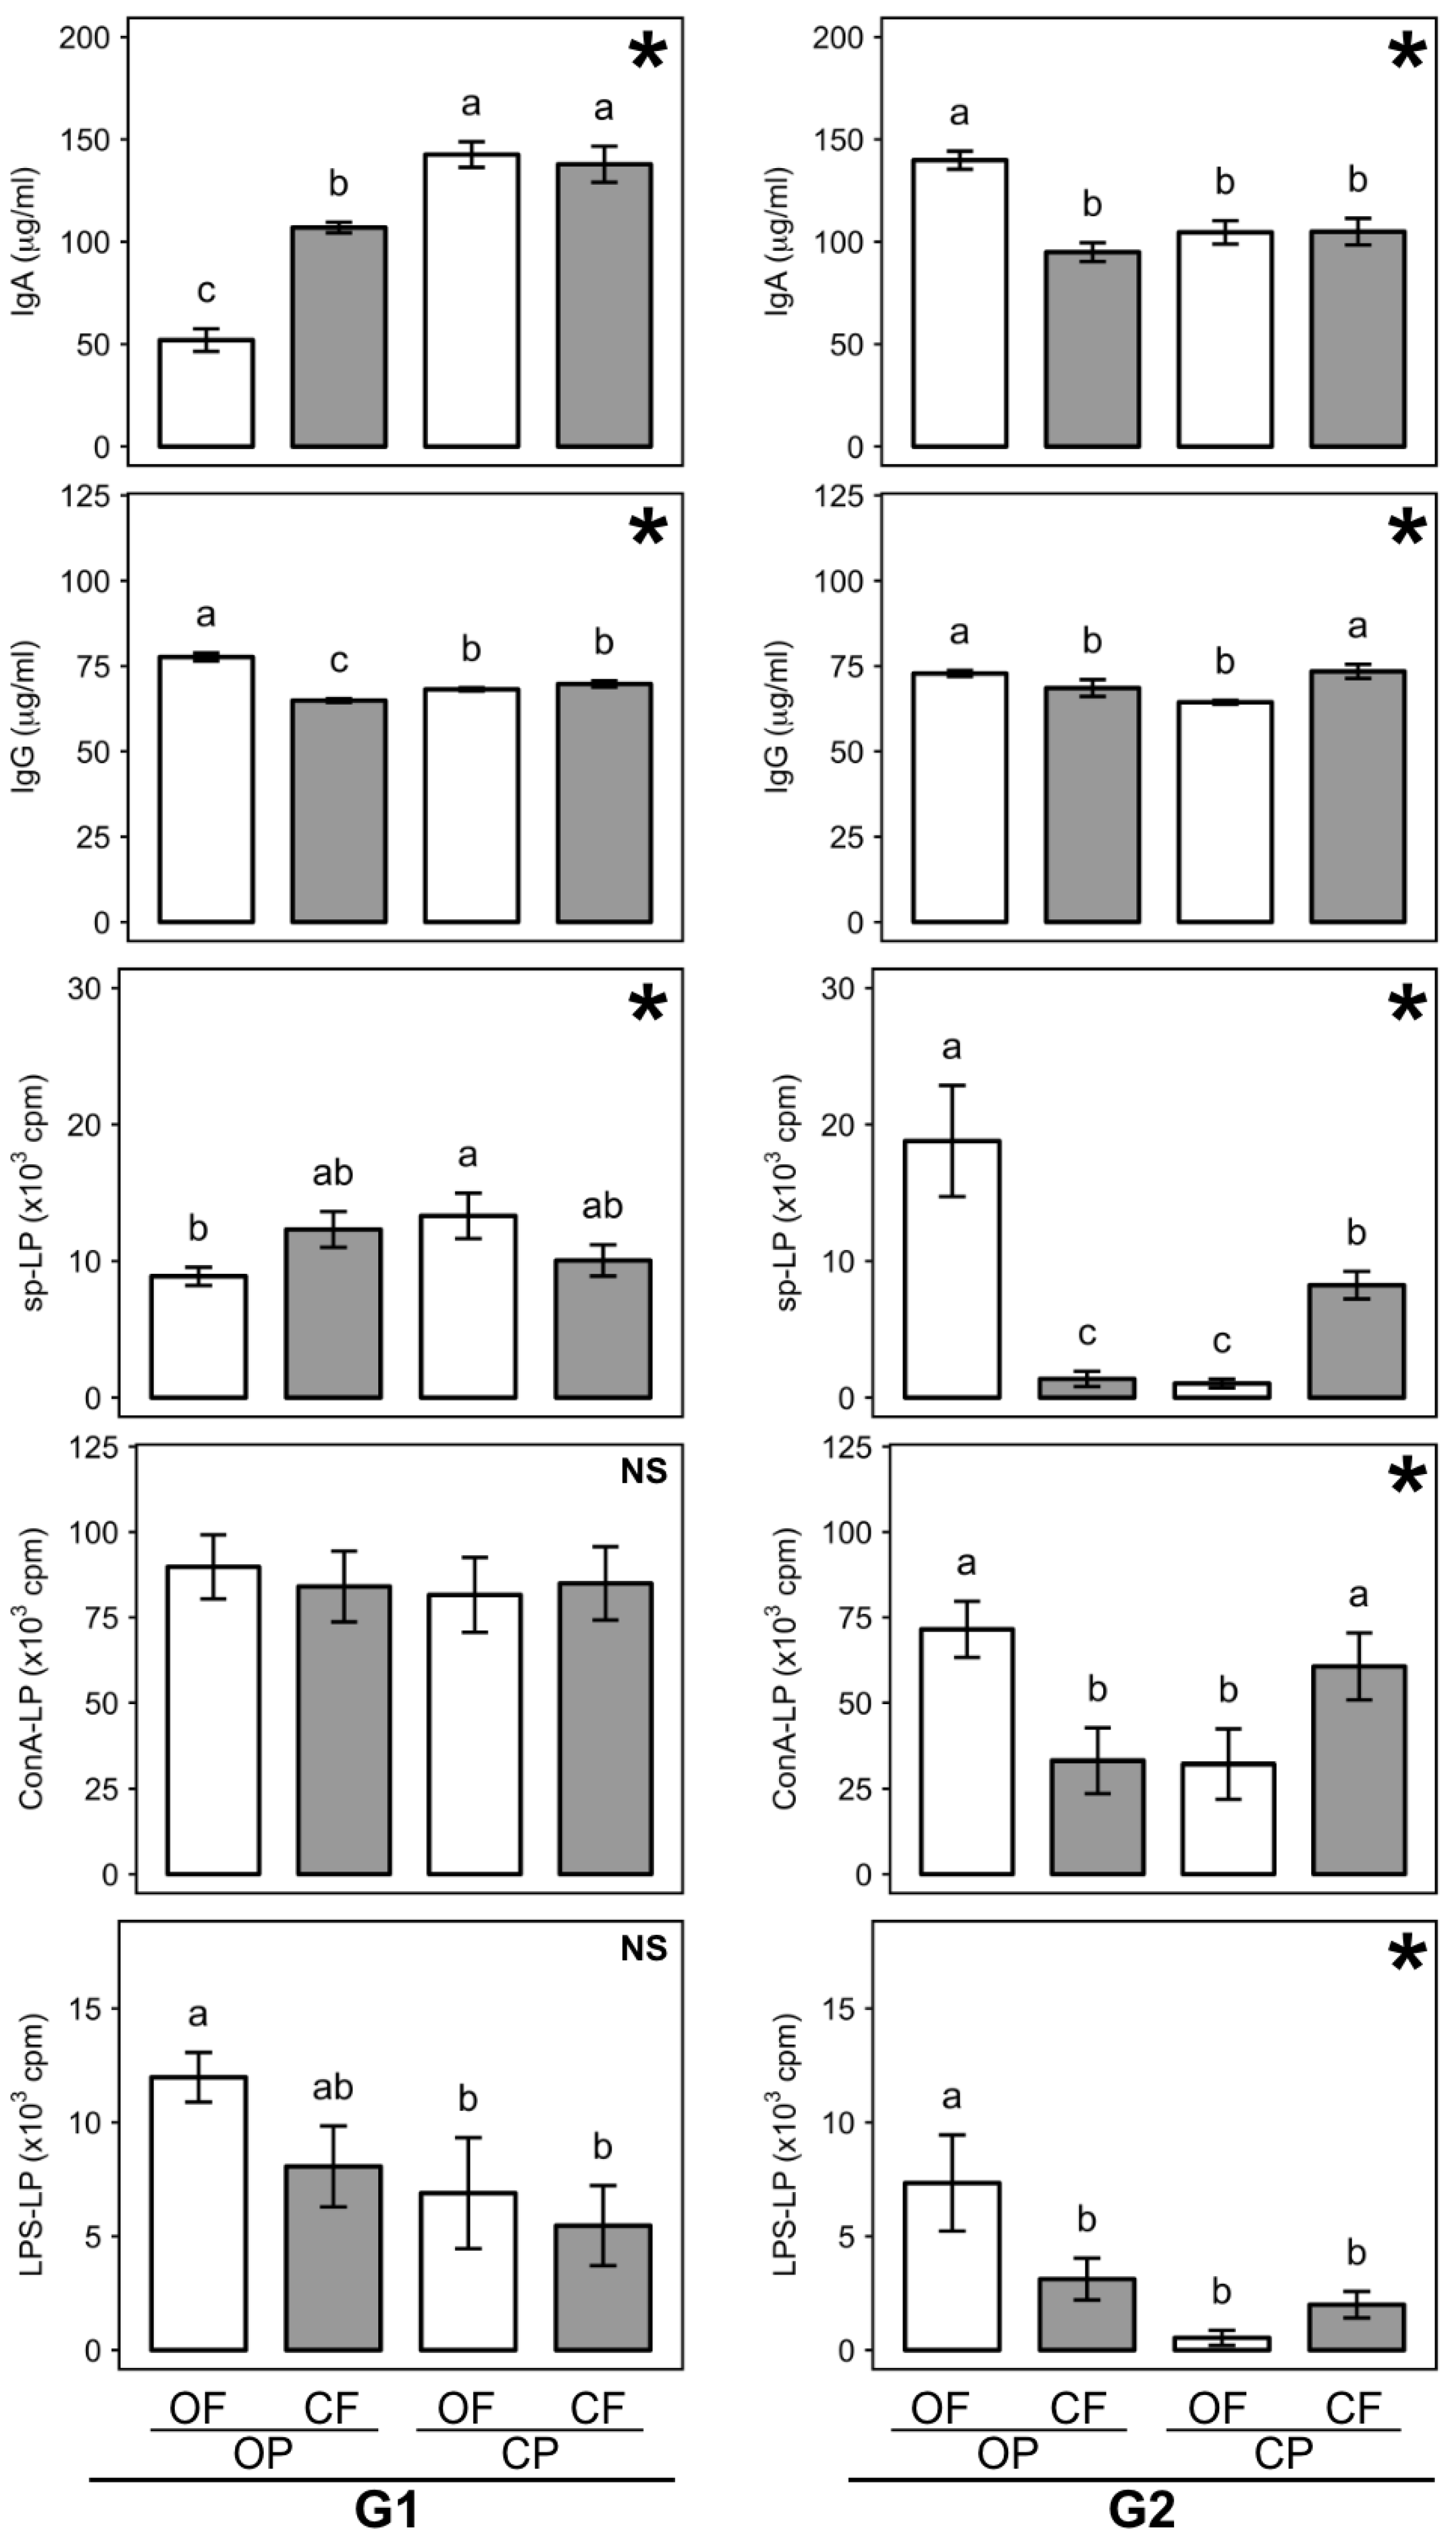 Nutrients | Free Full-Text | Feed Composition Differences Resulting from  Organic and Conventional Farming Practices Affect Physiological Parameters  in Wistar Rats—Results from a Factorial, Two-Generation Dietary  Intervention Trial